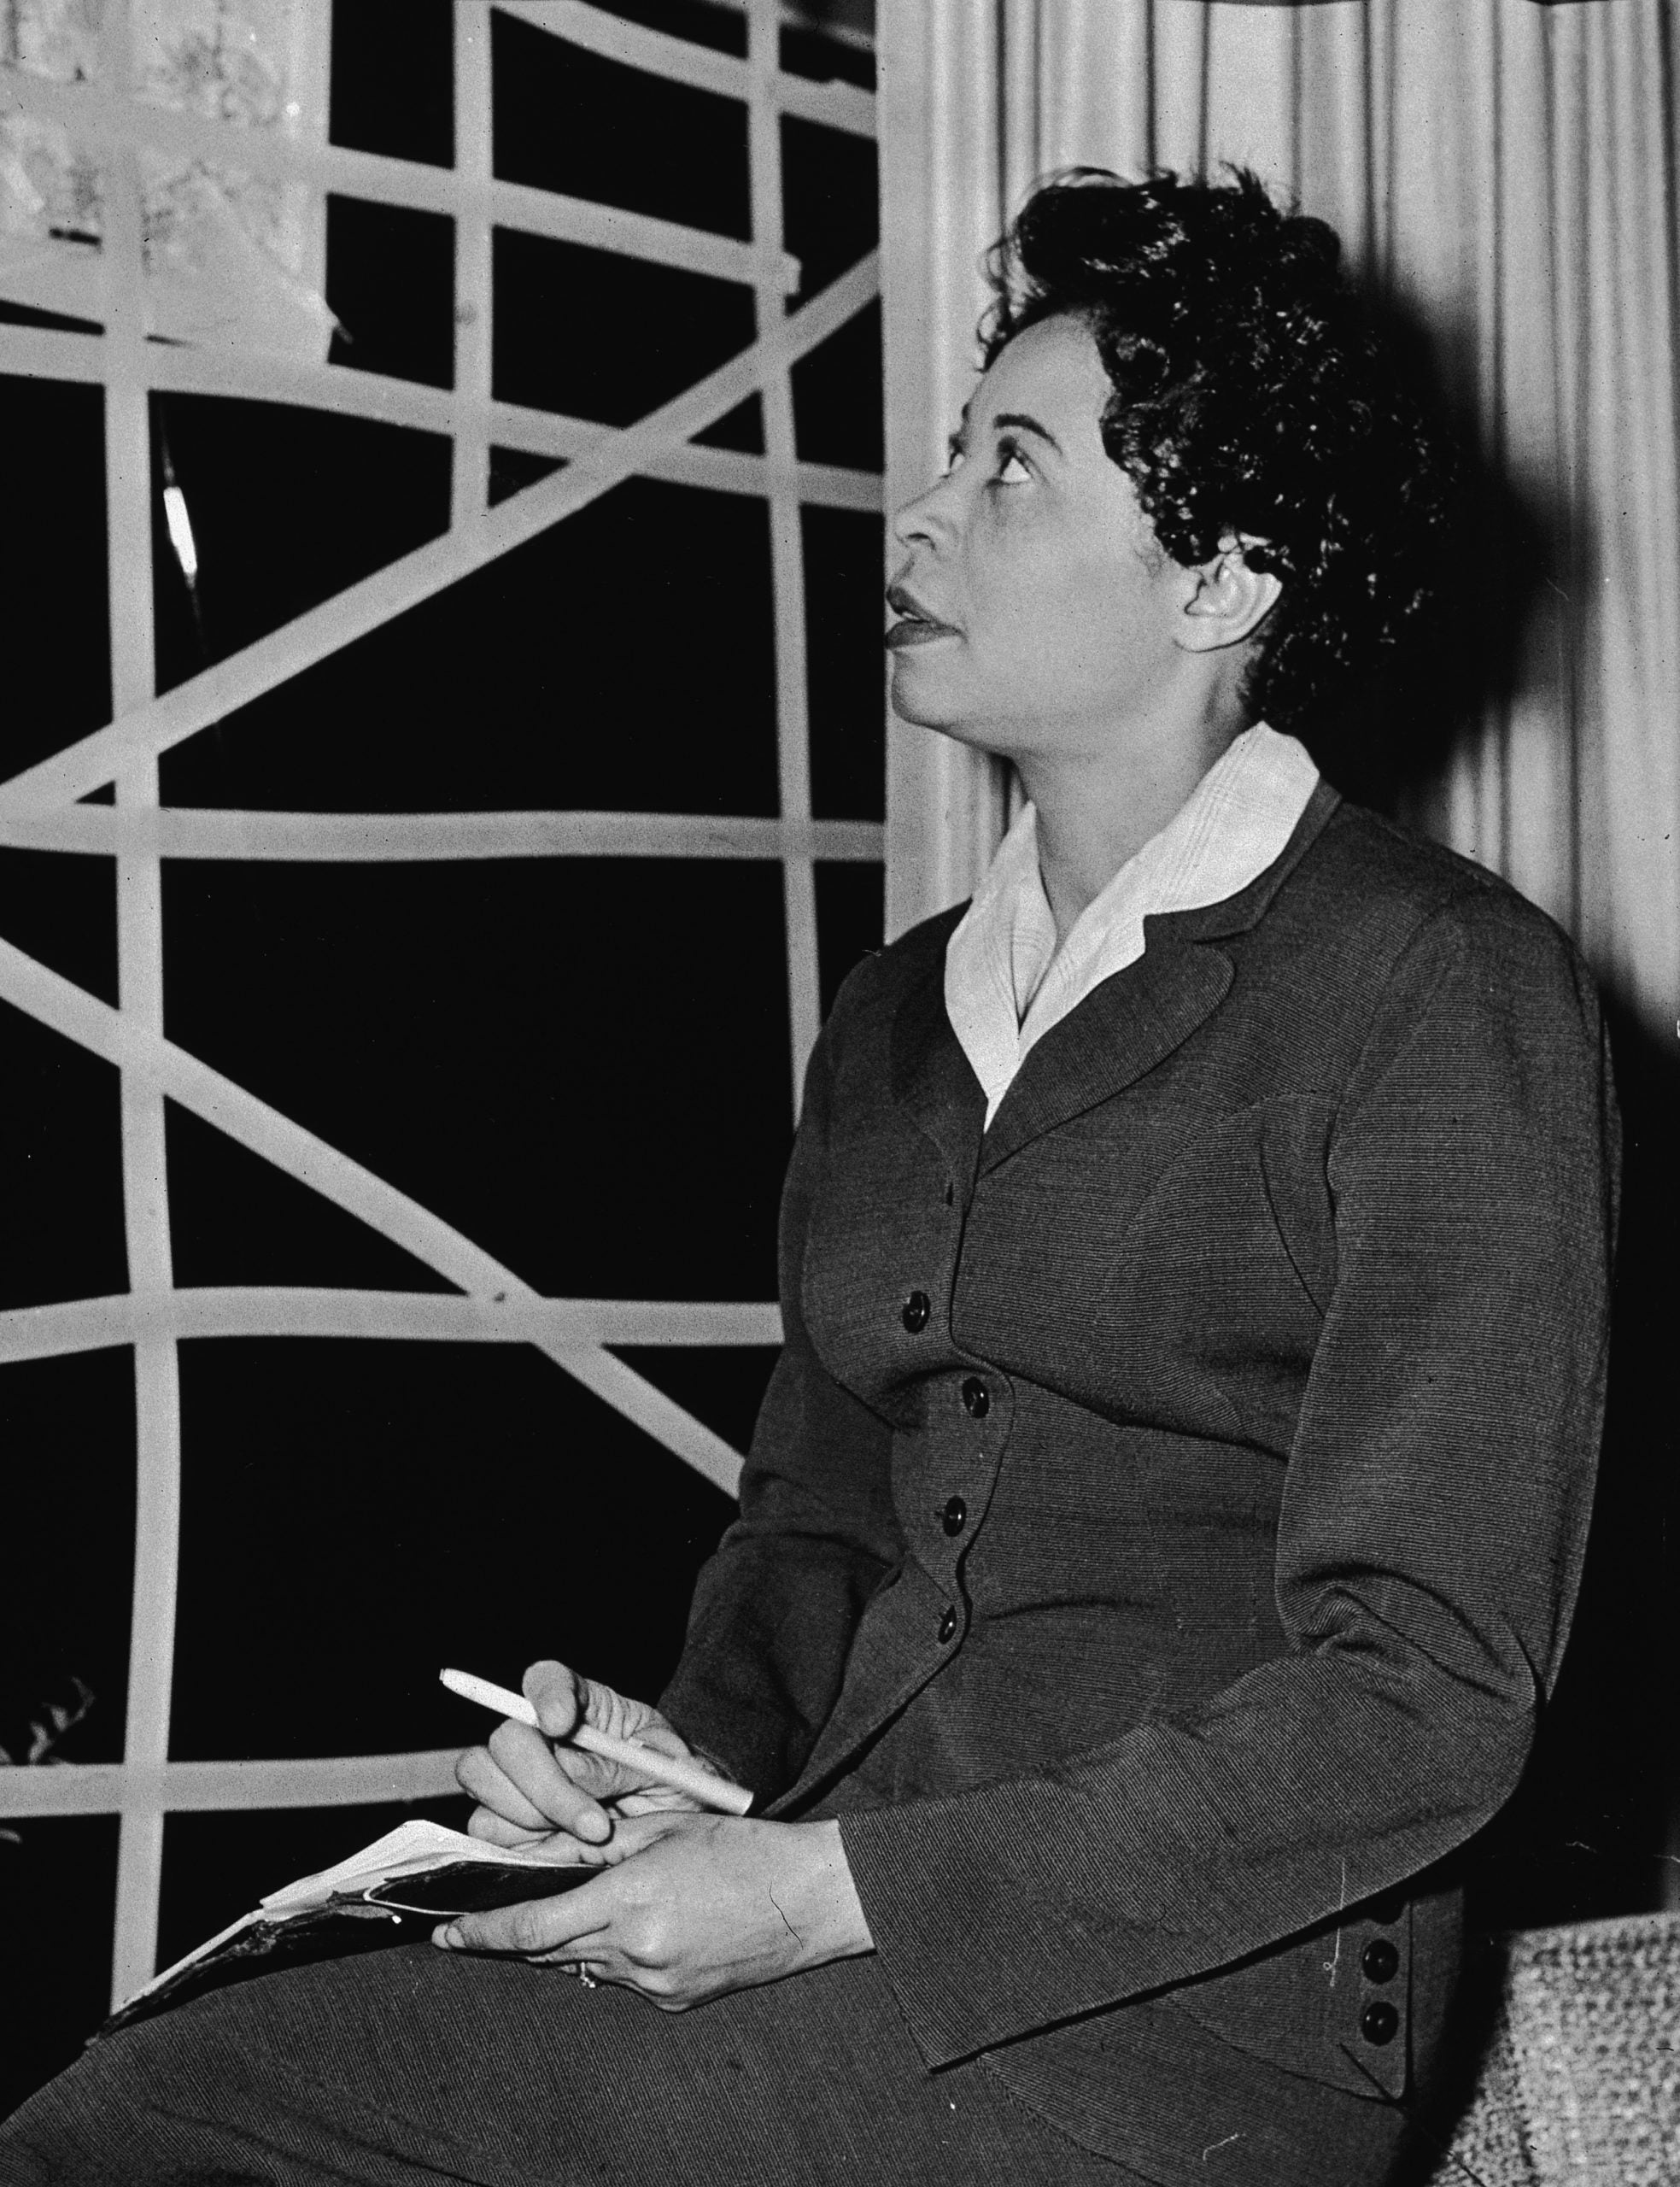 Daisy Bates’s Fight For Desegregation